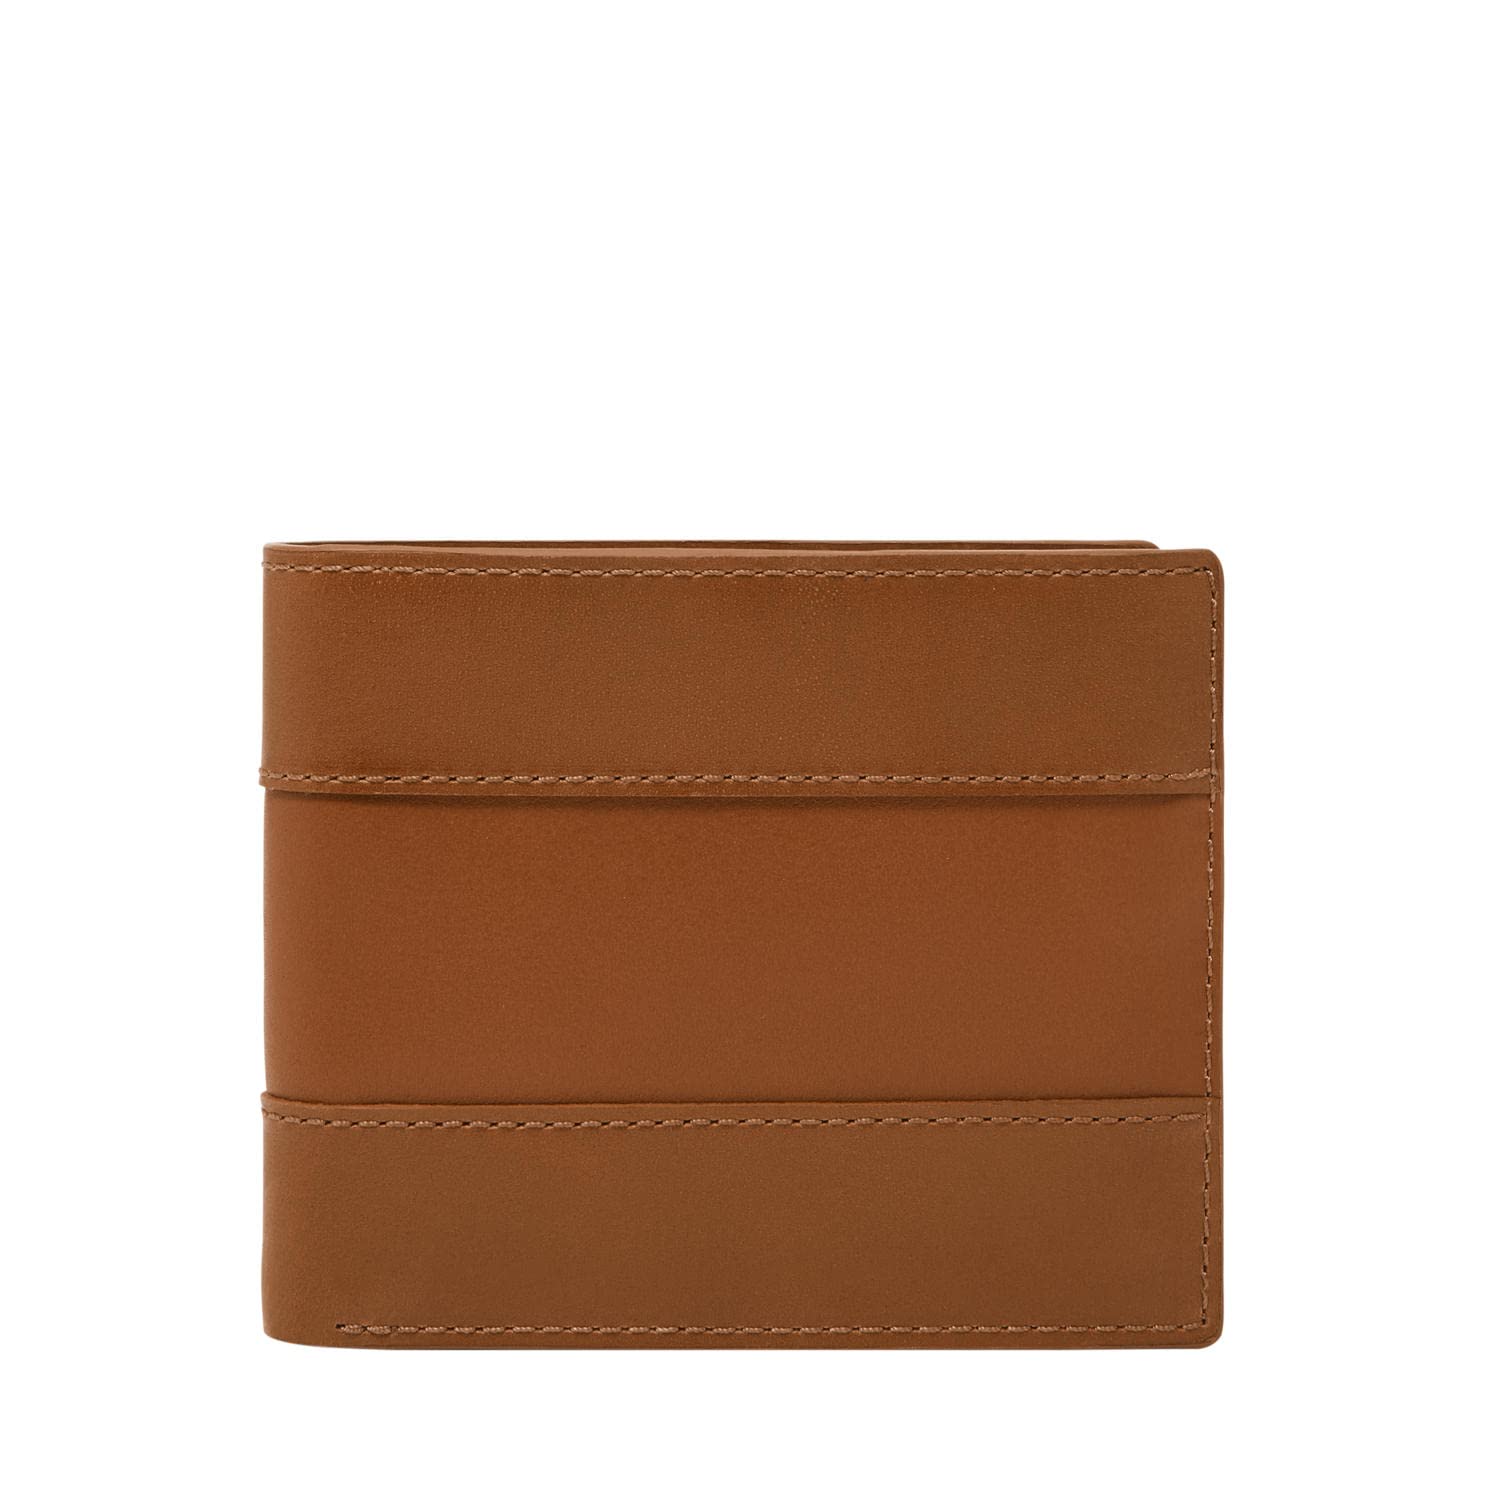 Fossil Men's Leather Bifold Wallet with Flip ID Window for Men $18.99